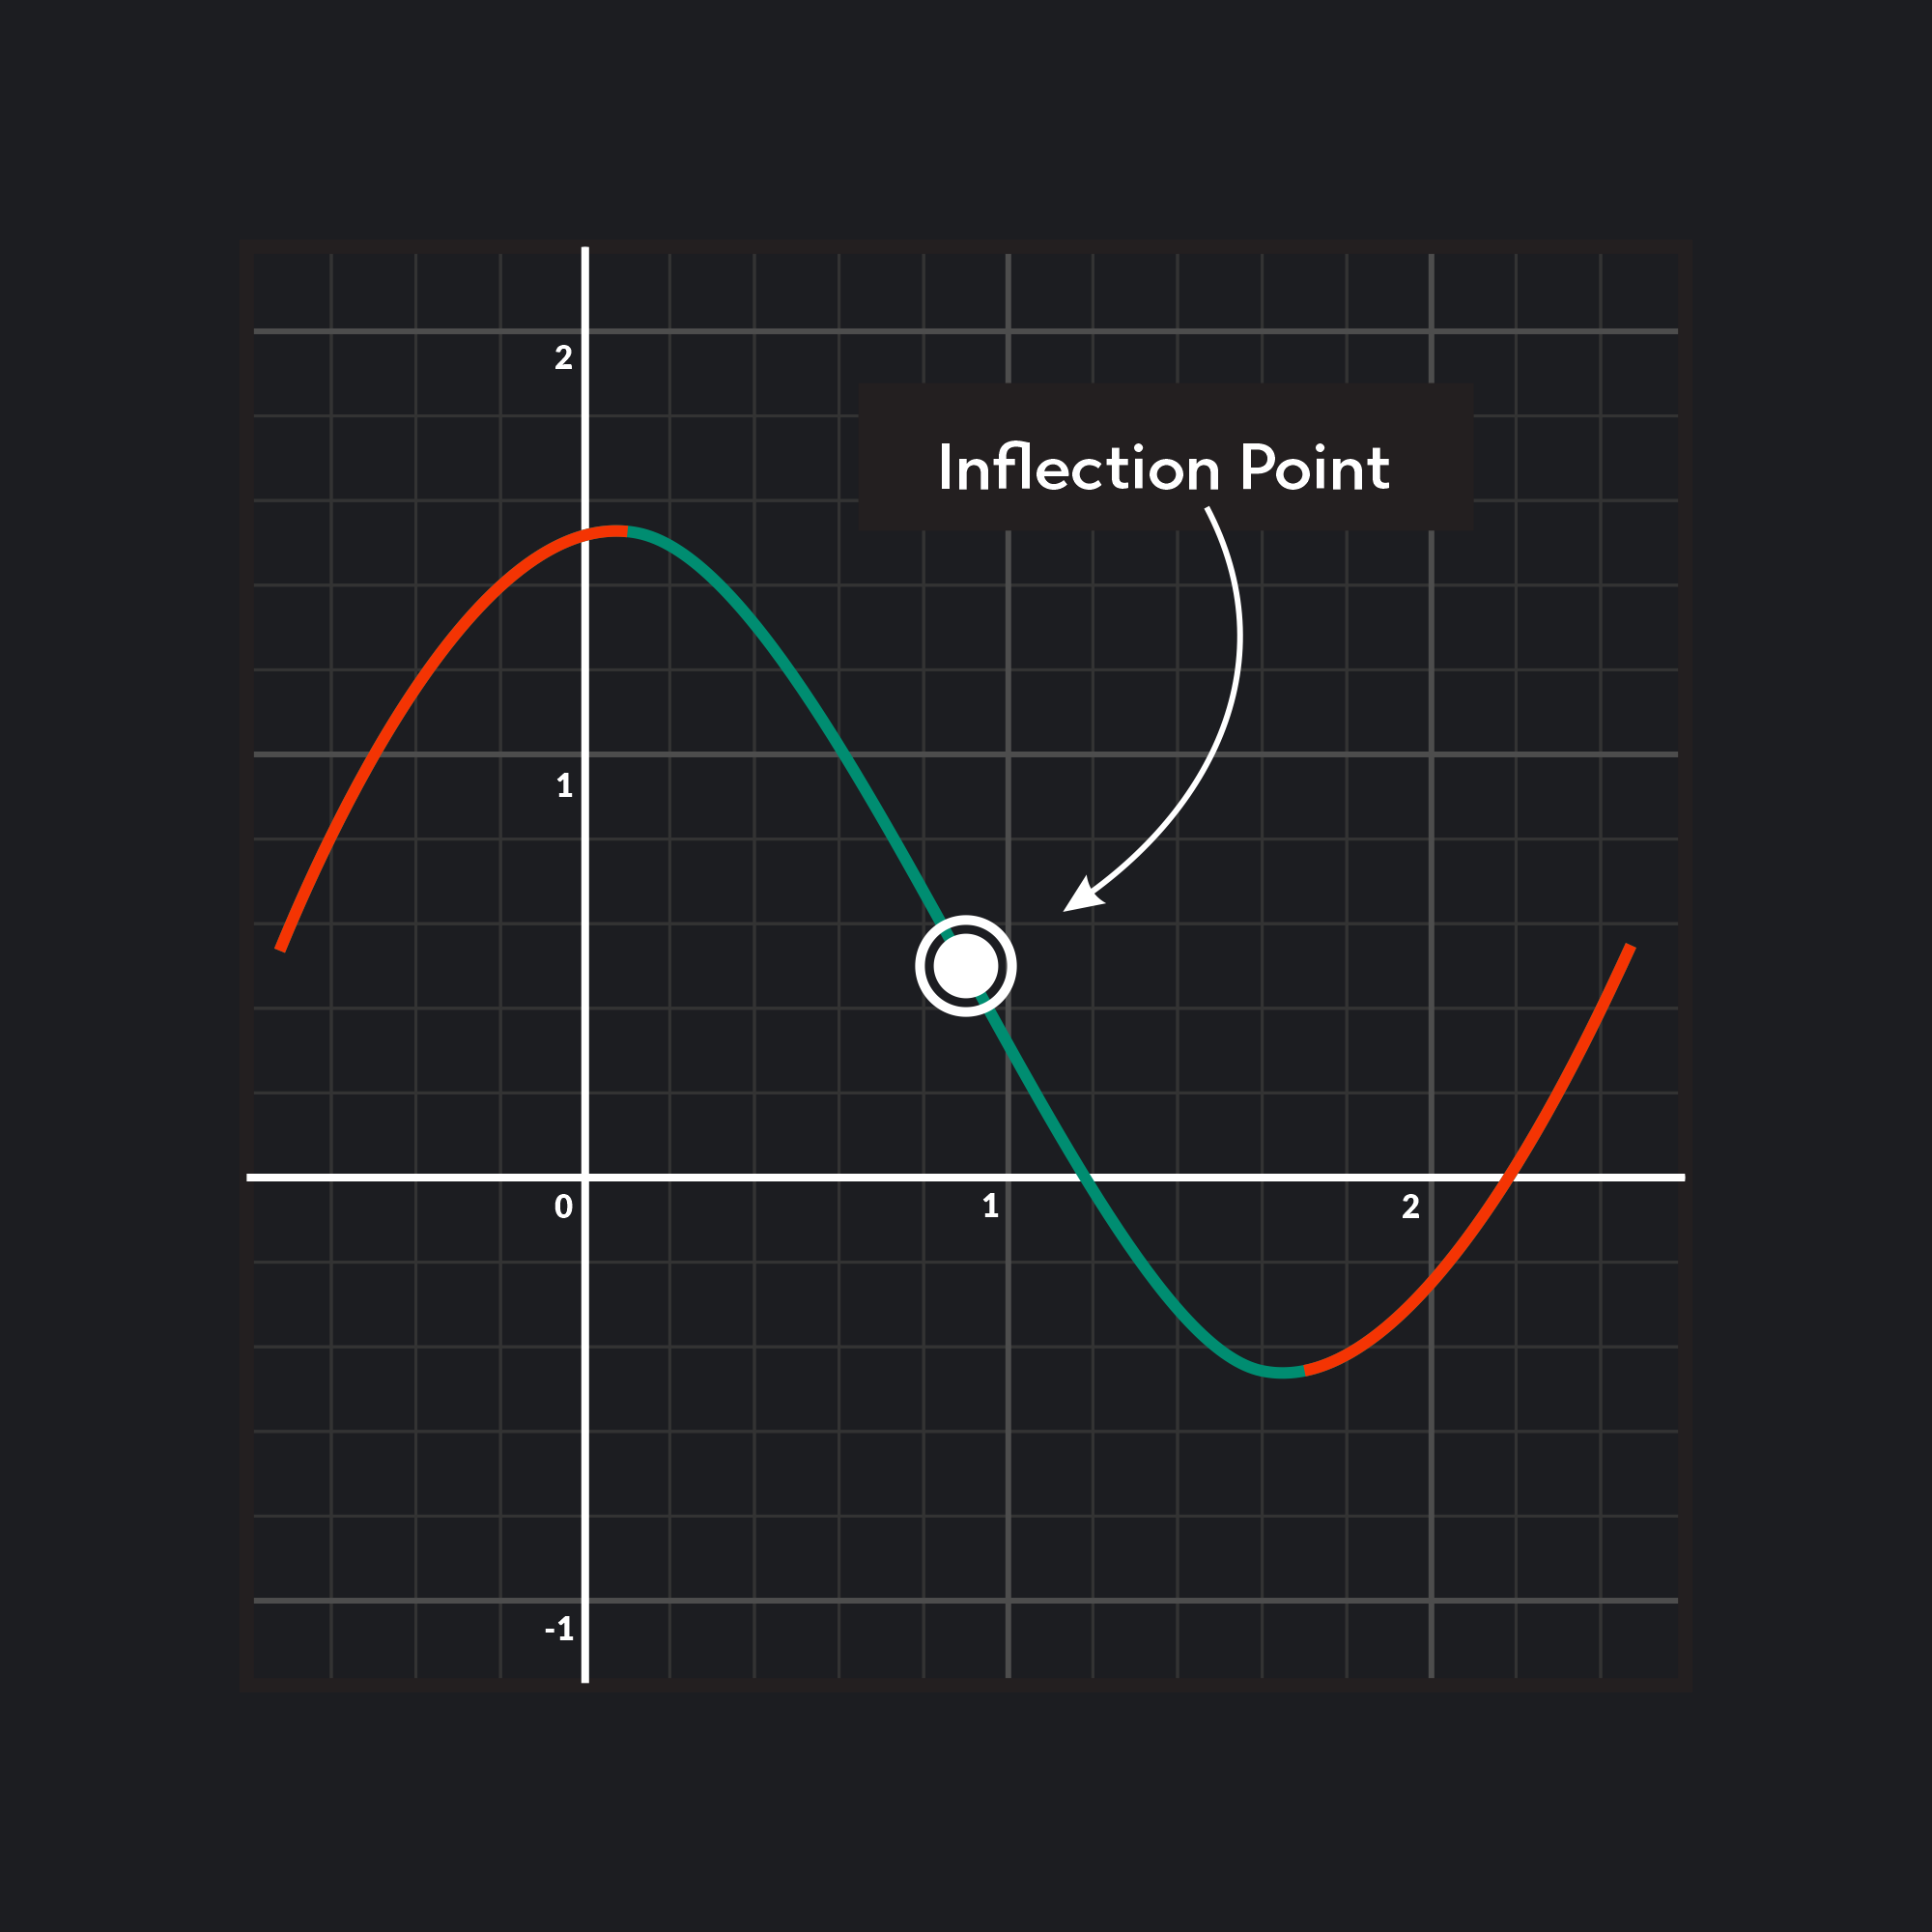 Inflection Point shown on a graph